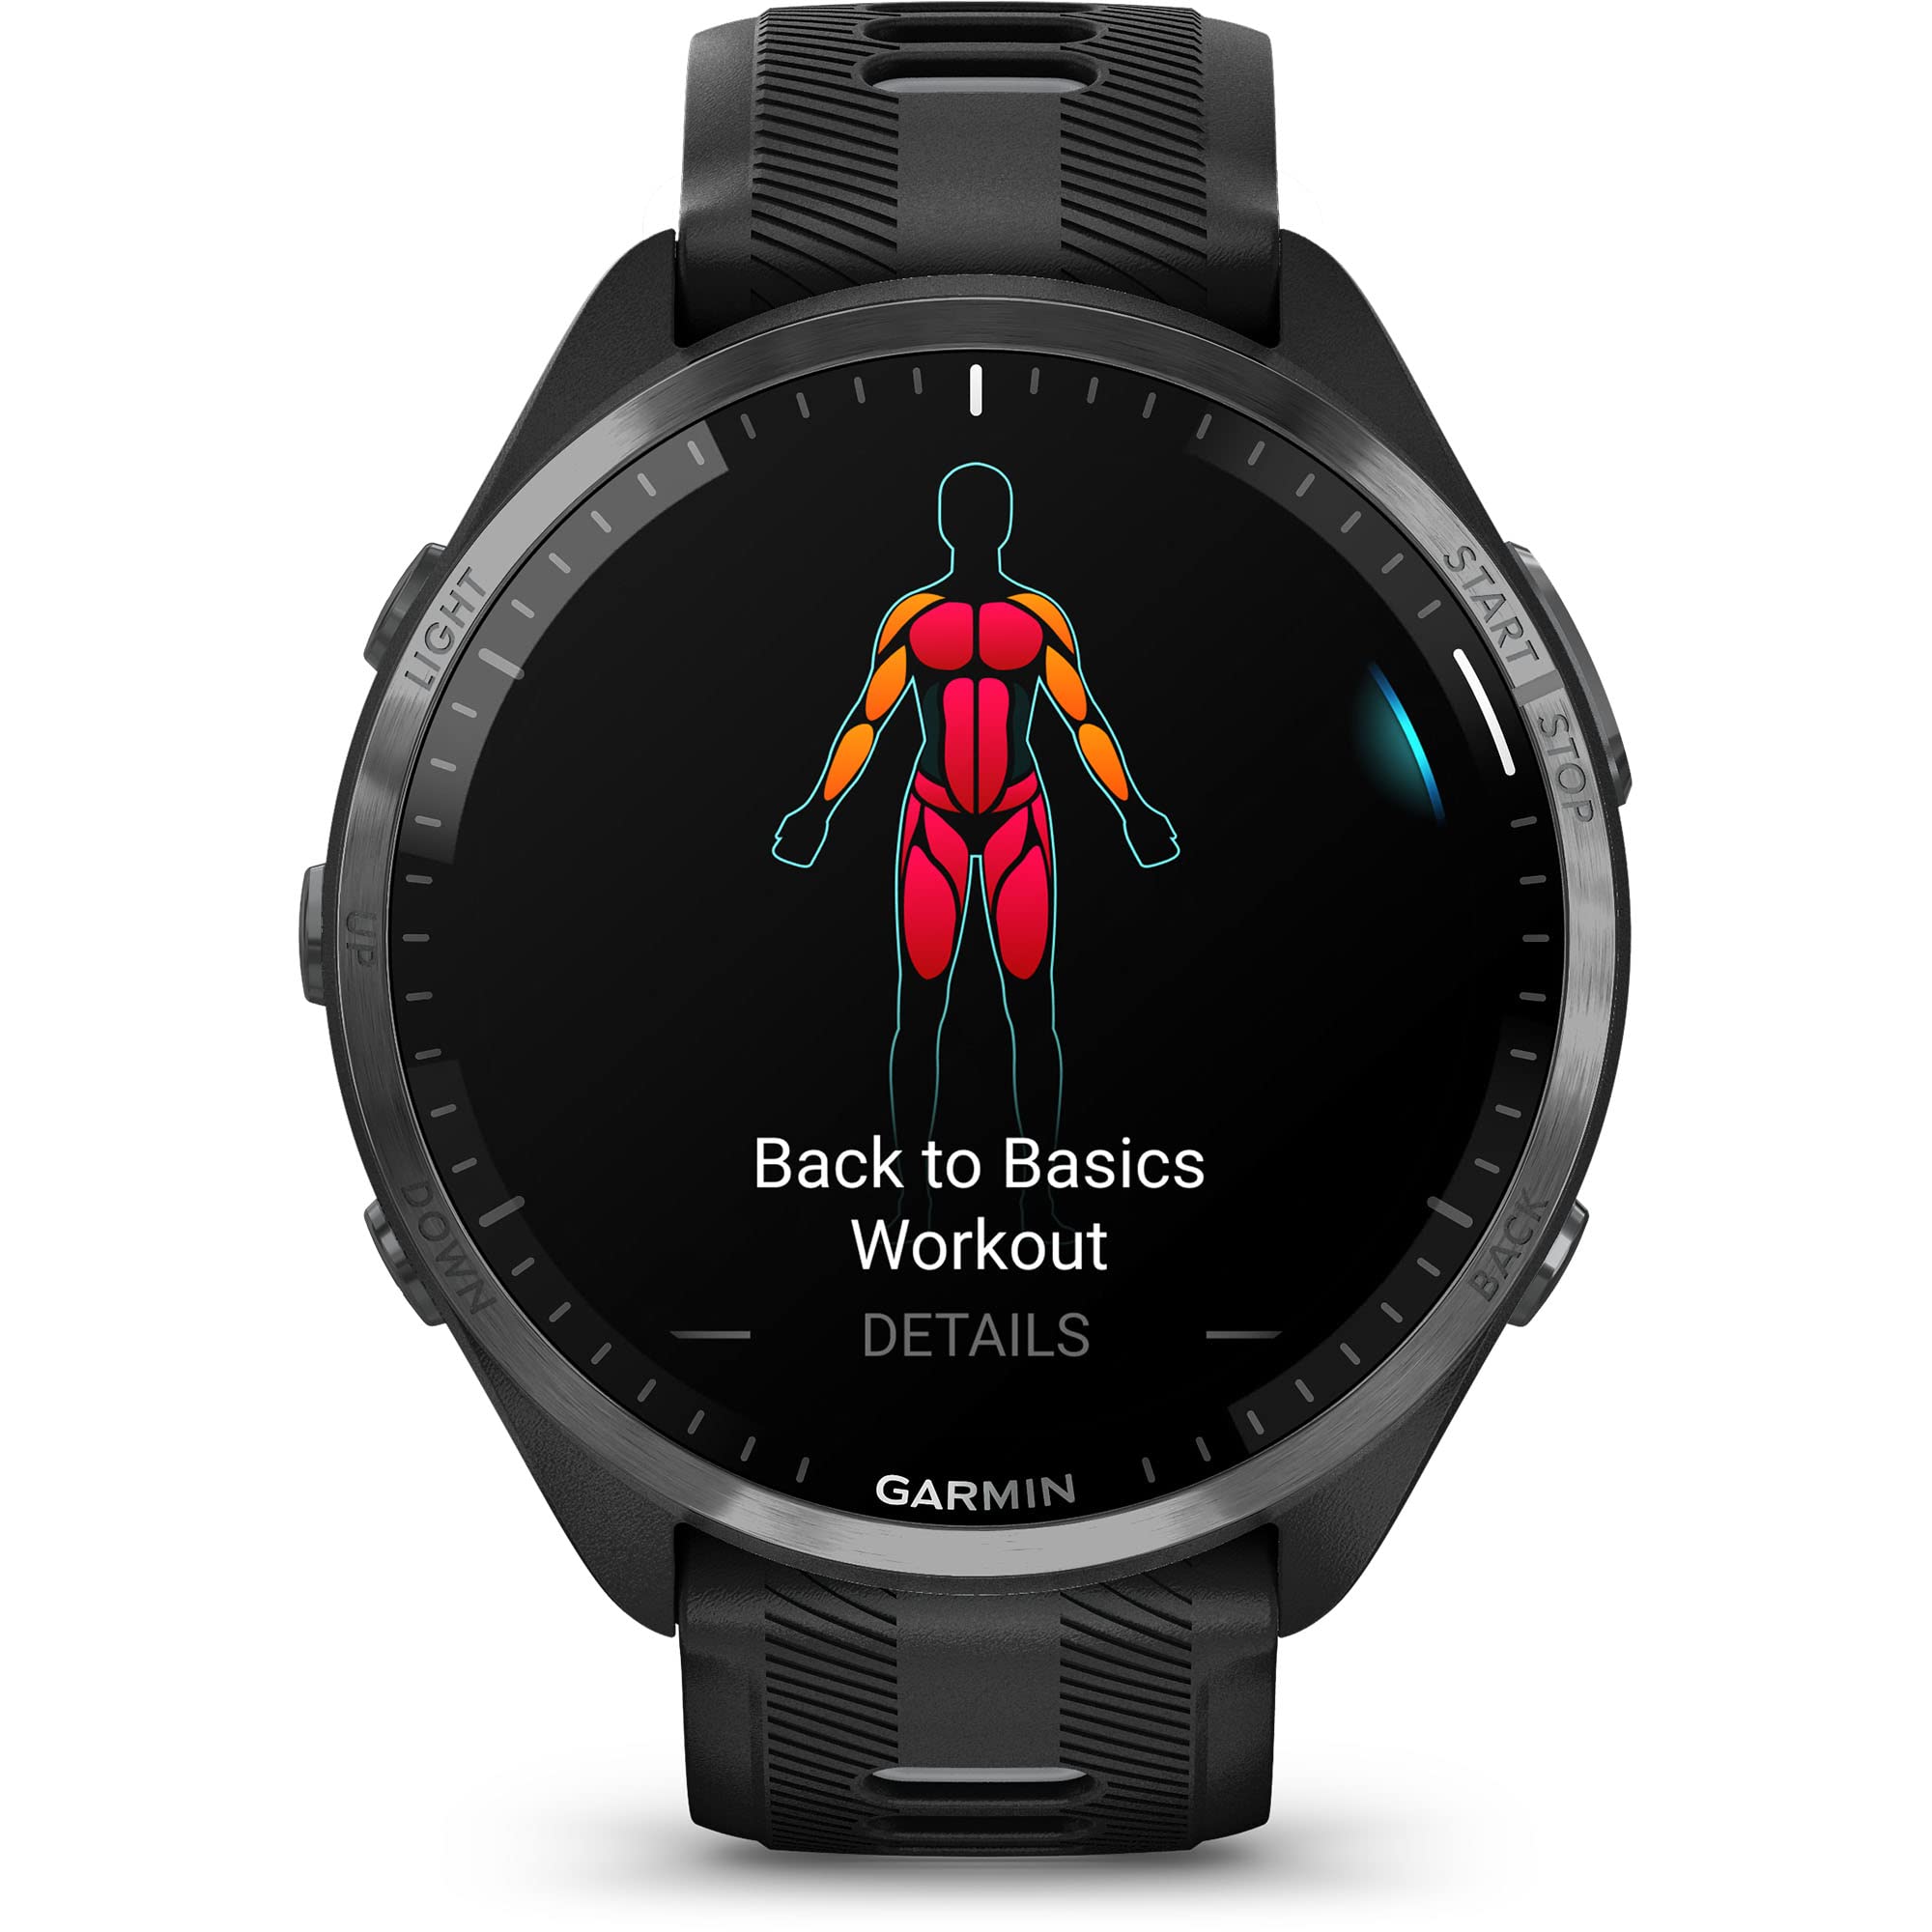 Garmin Forerunner® 965 Running Smartwatch, Colorful AMOLED Display, Training Metrics and Recovery Insights, Black and Powder Gray - image 5 of 5